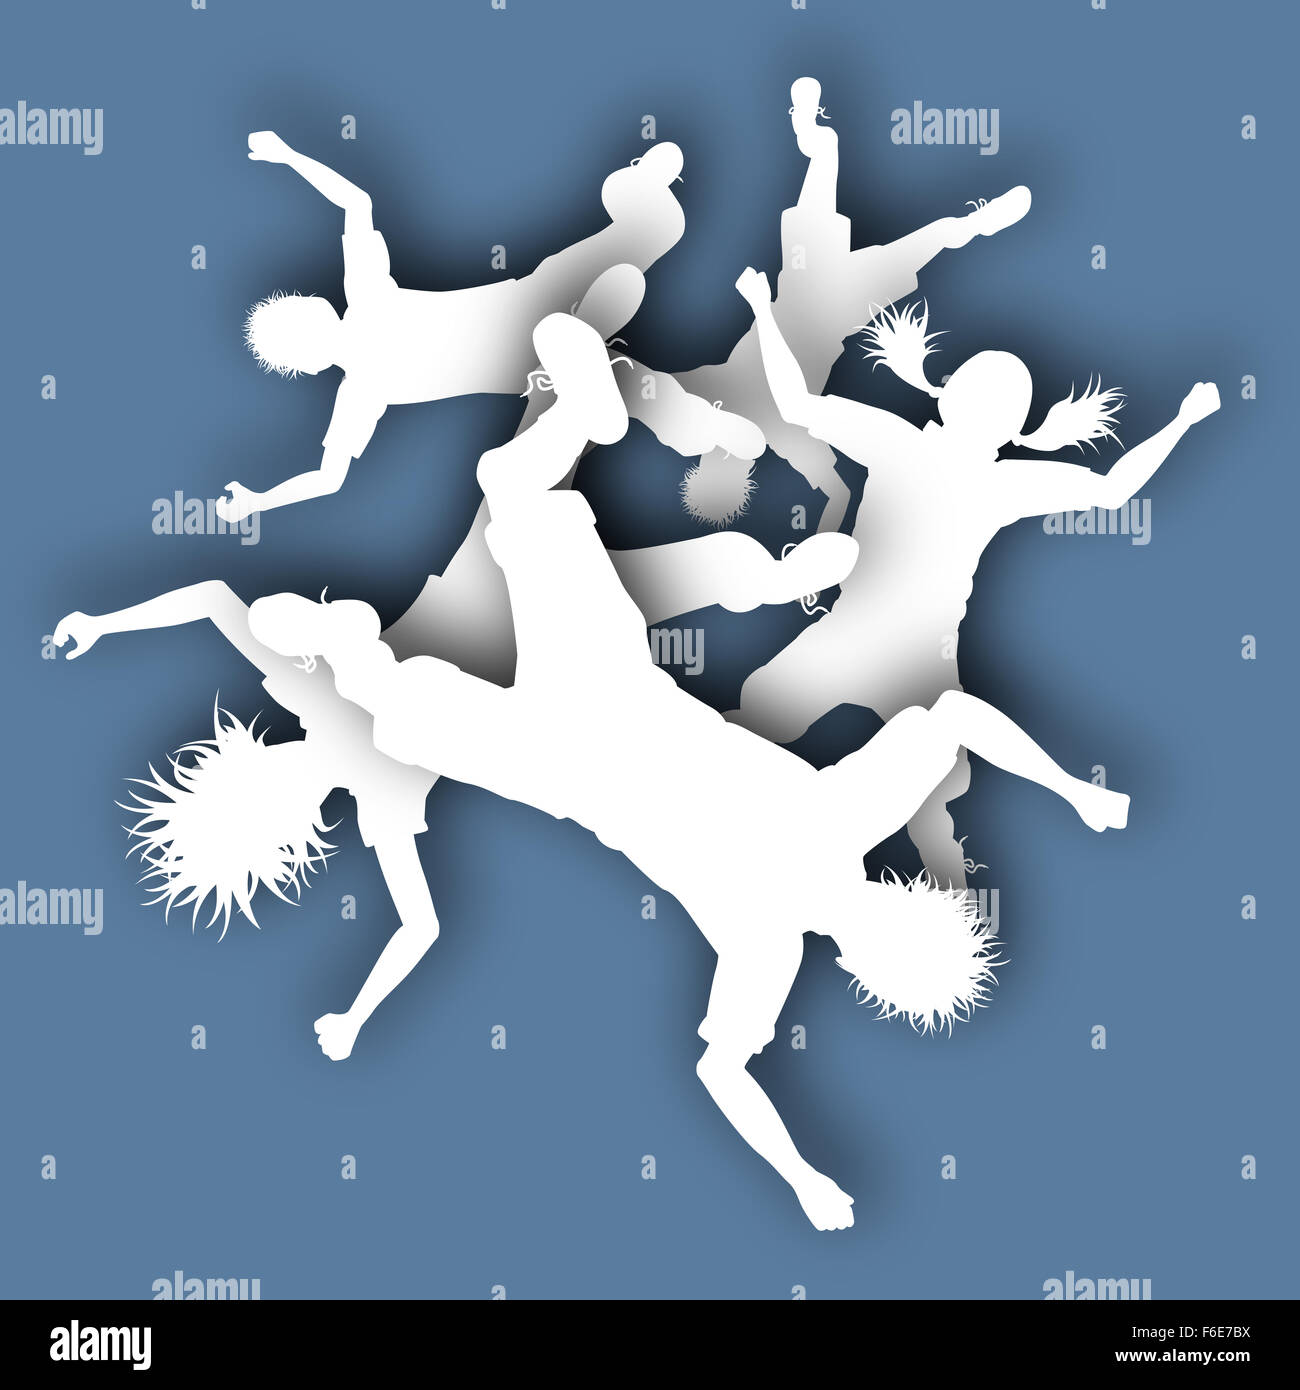 Illustrated cutout silhouettes of children falling from a blue sky Stock Photo